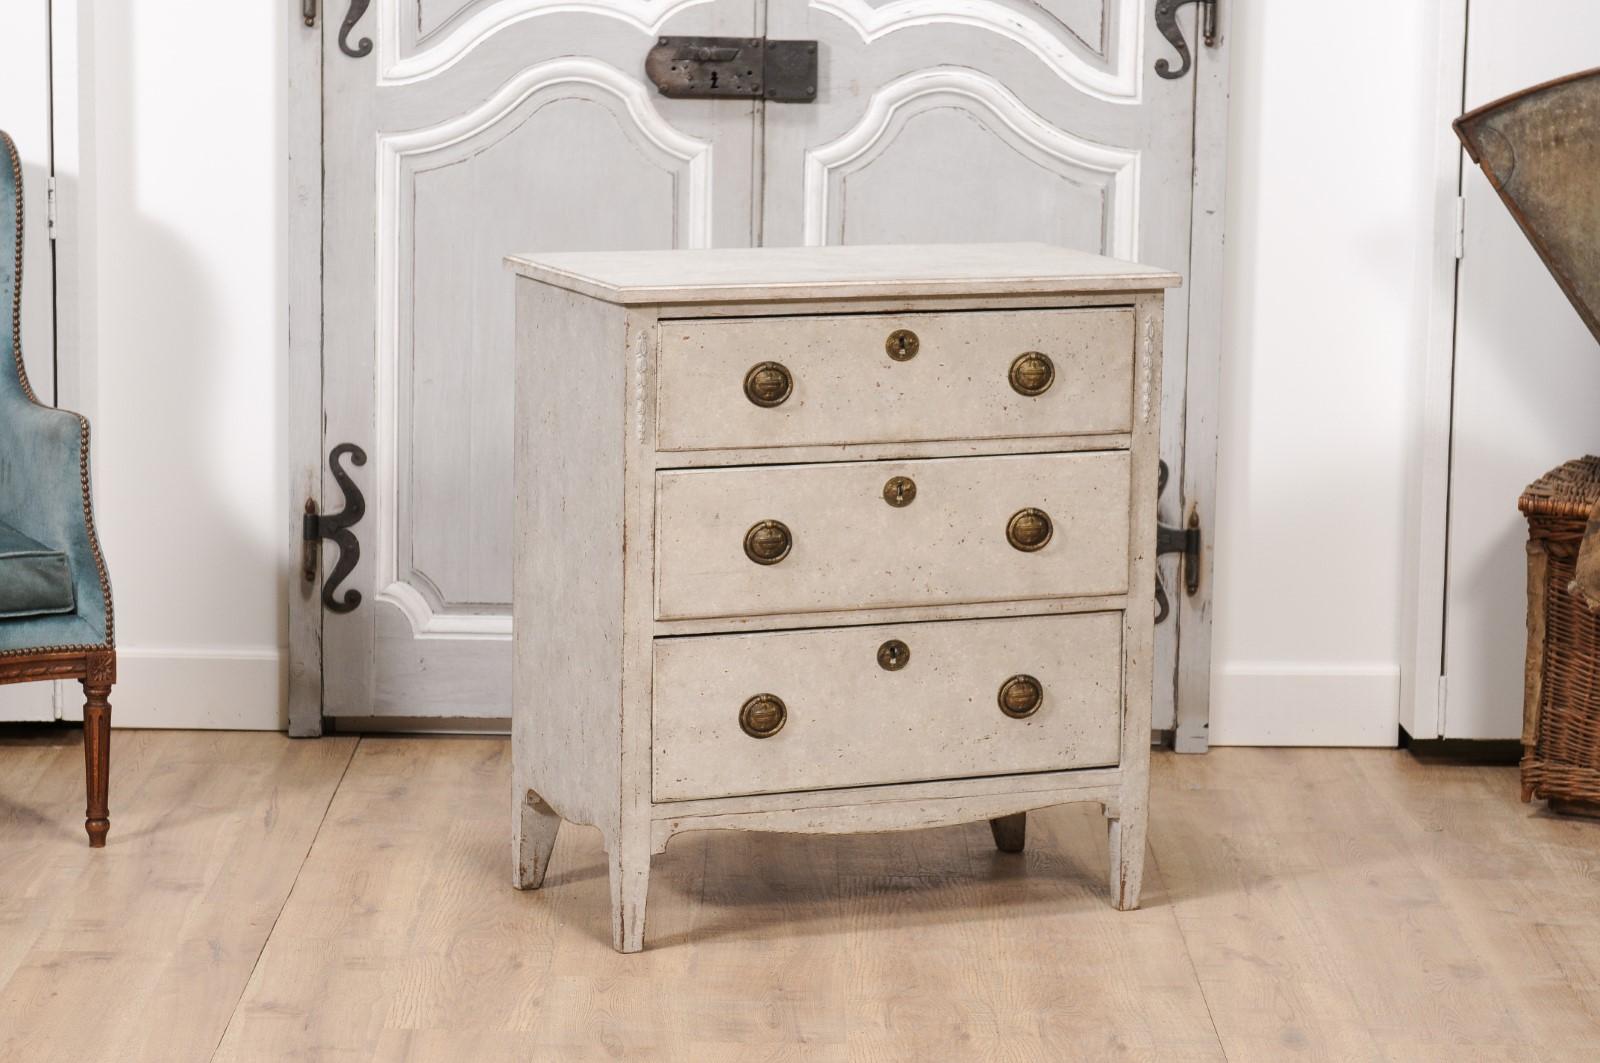 A Swedish Gustavian style light grey painted chest from the 20th century with three drawers, floral carved side posts, valanced apron and tapered feet. Immerse your living space in the timeless allure of Scandinavian elegance with this 20th-century